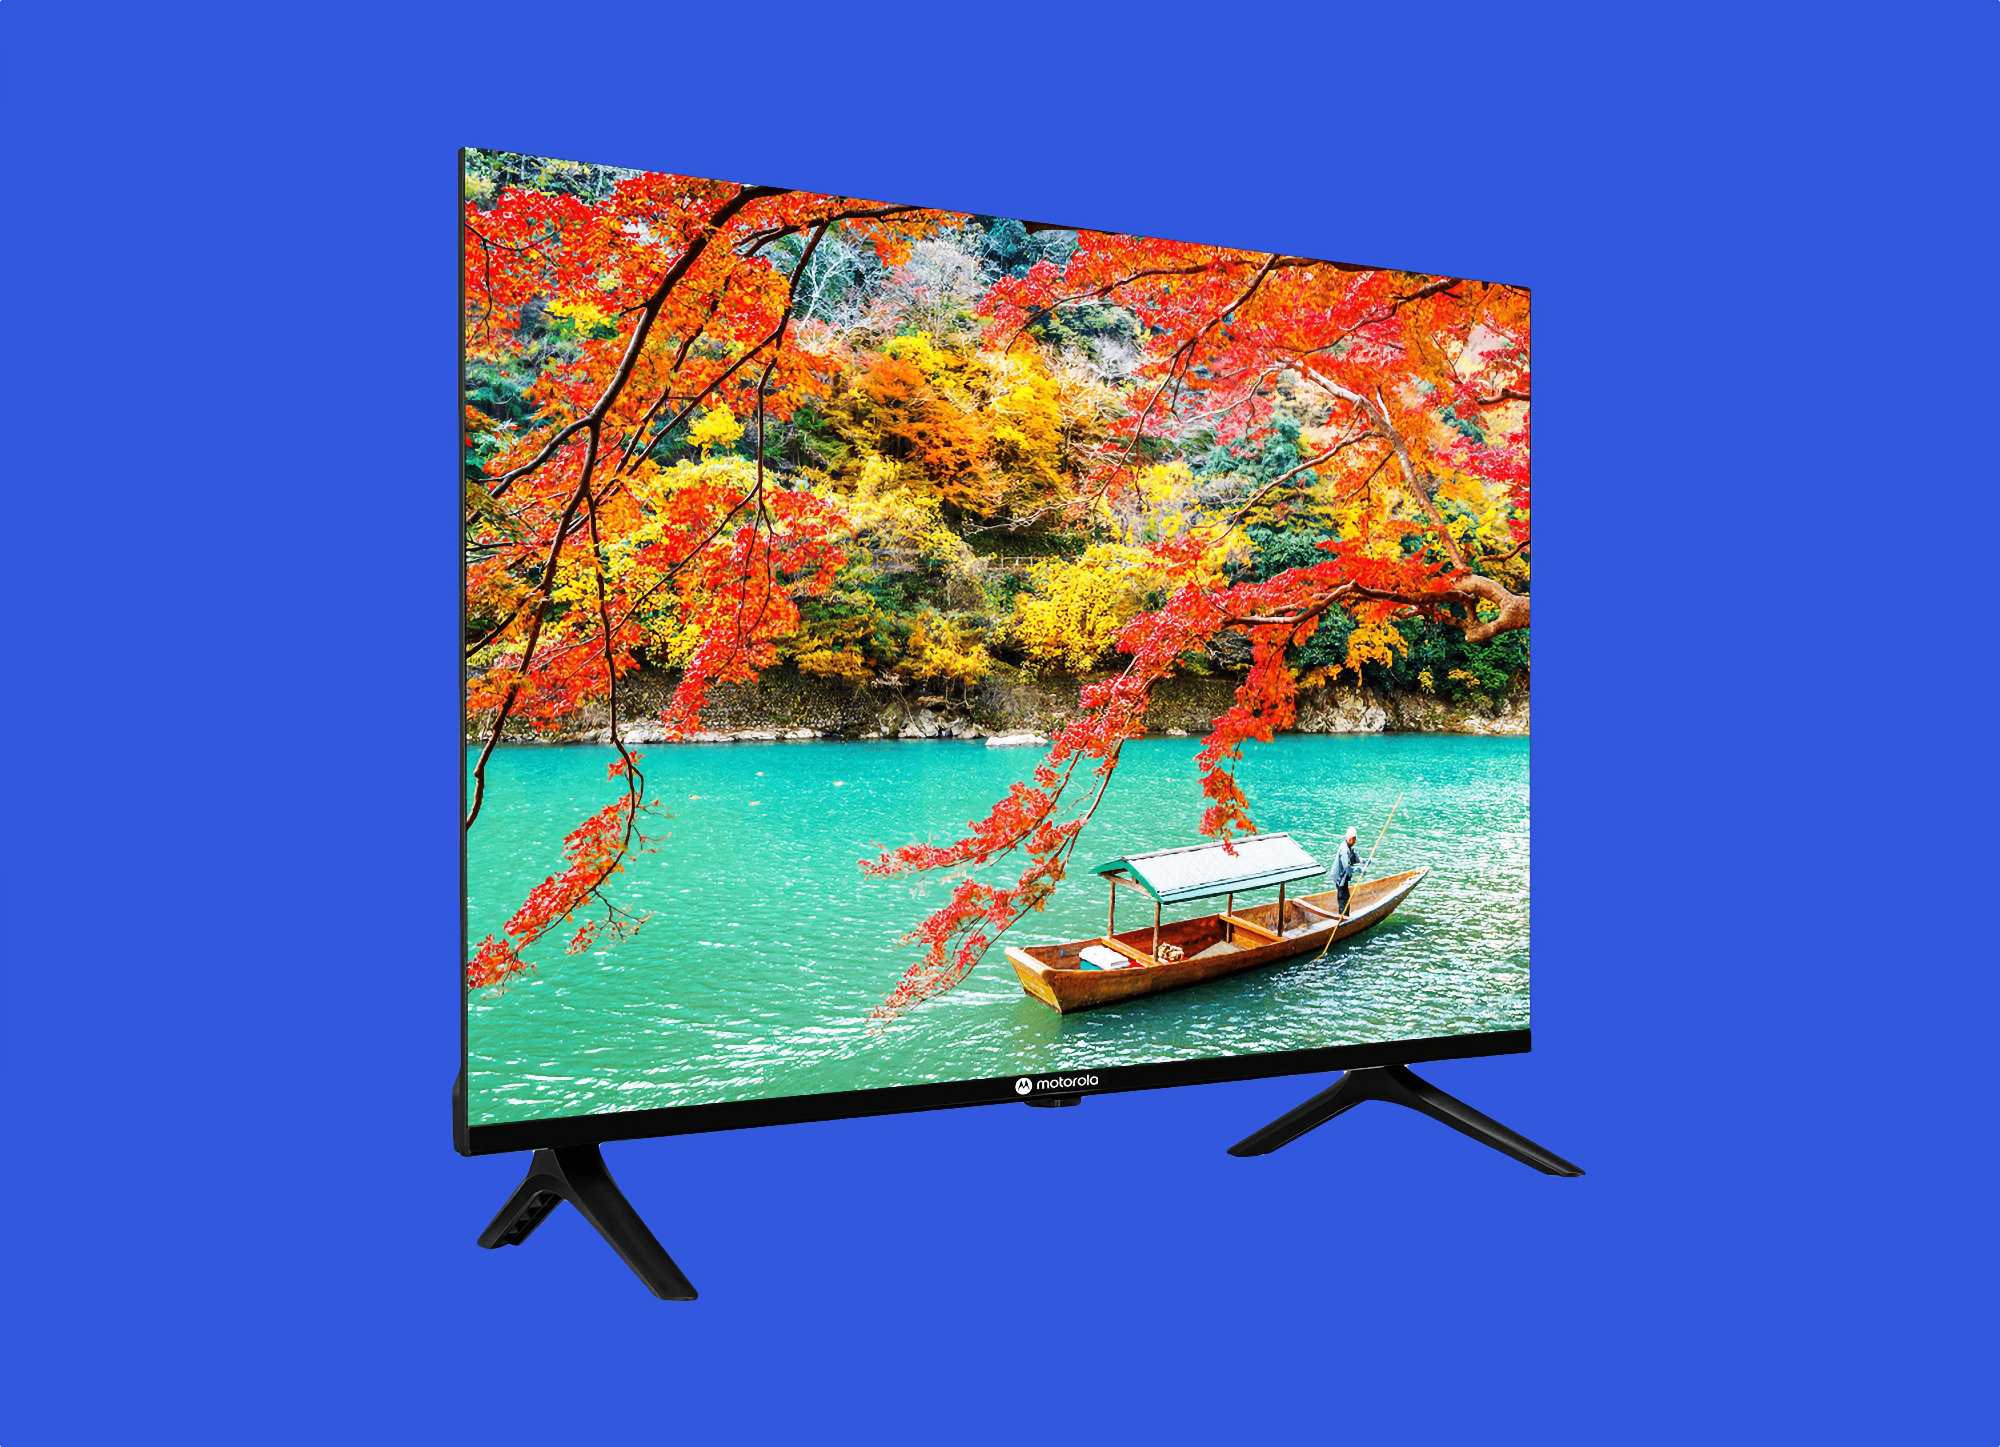 Motorola prepares to release Envision Smart TV range with up to 55in screens and MediaTek chips